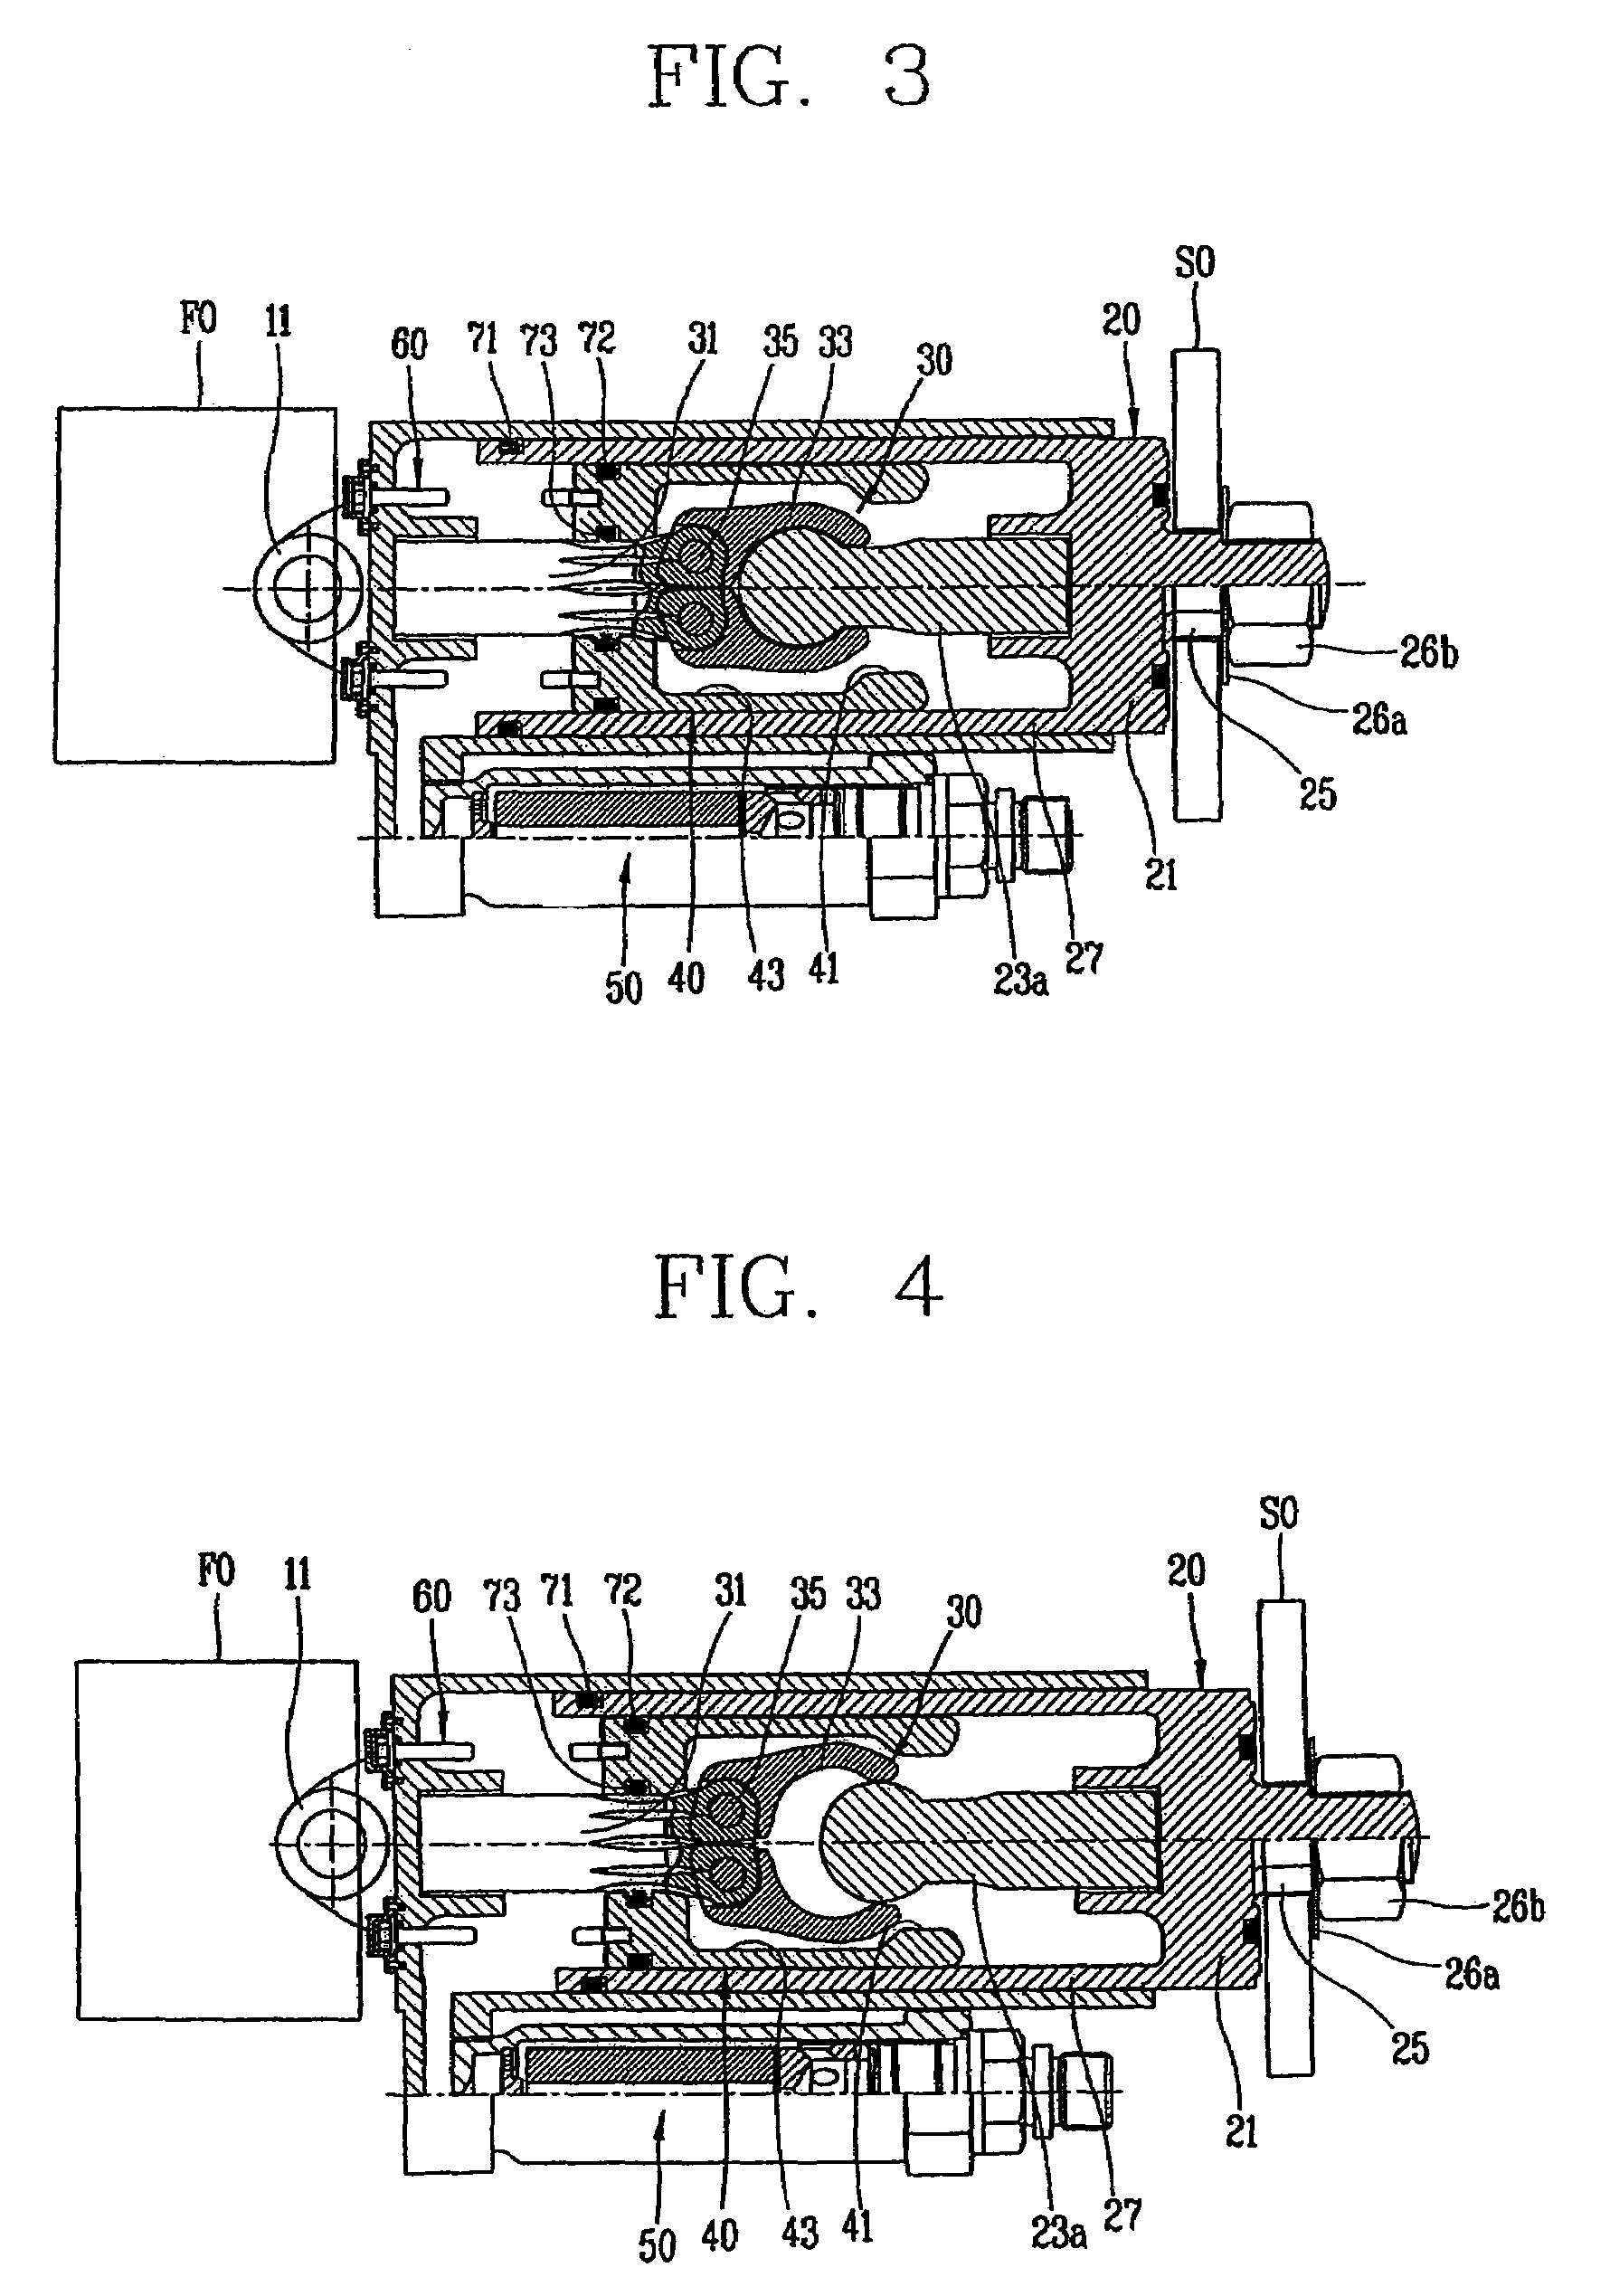 Apparatus for connecting and disconnecting two objects